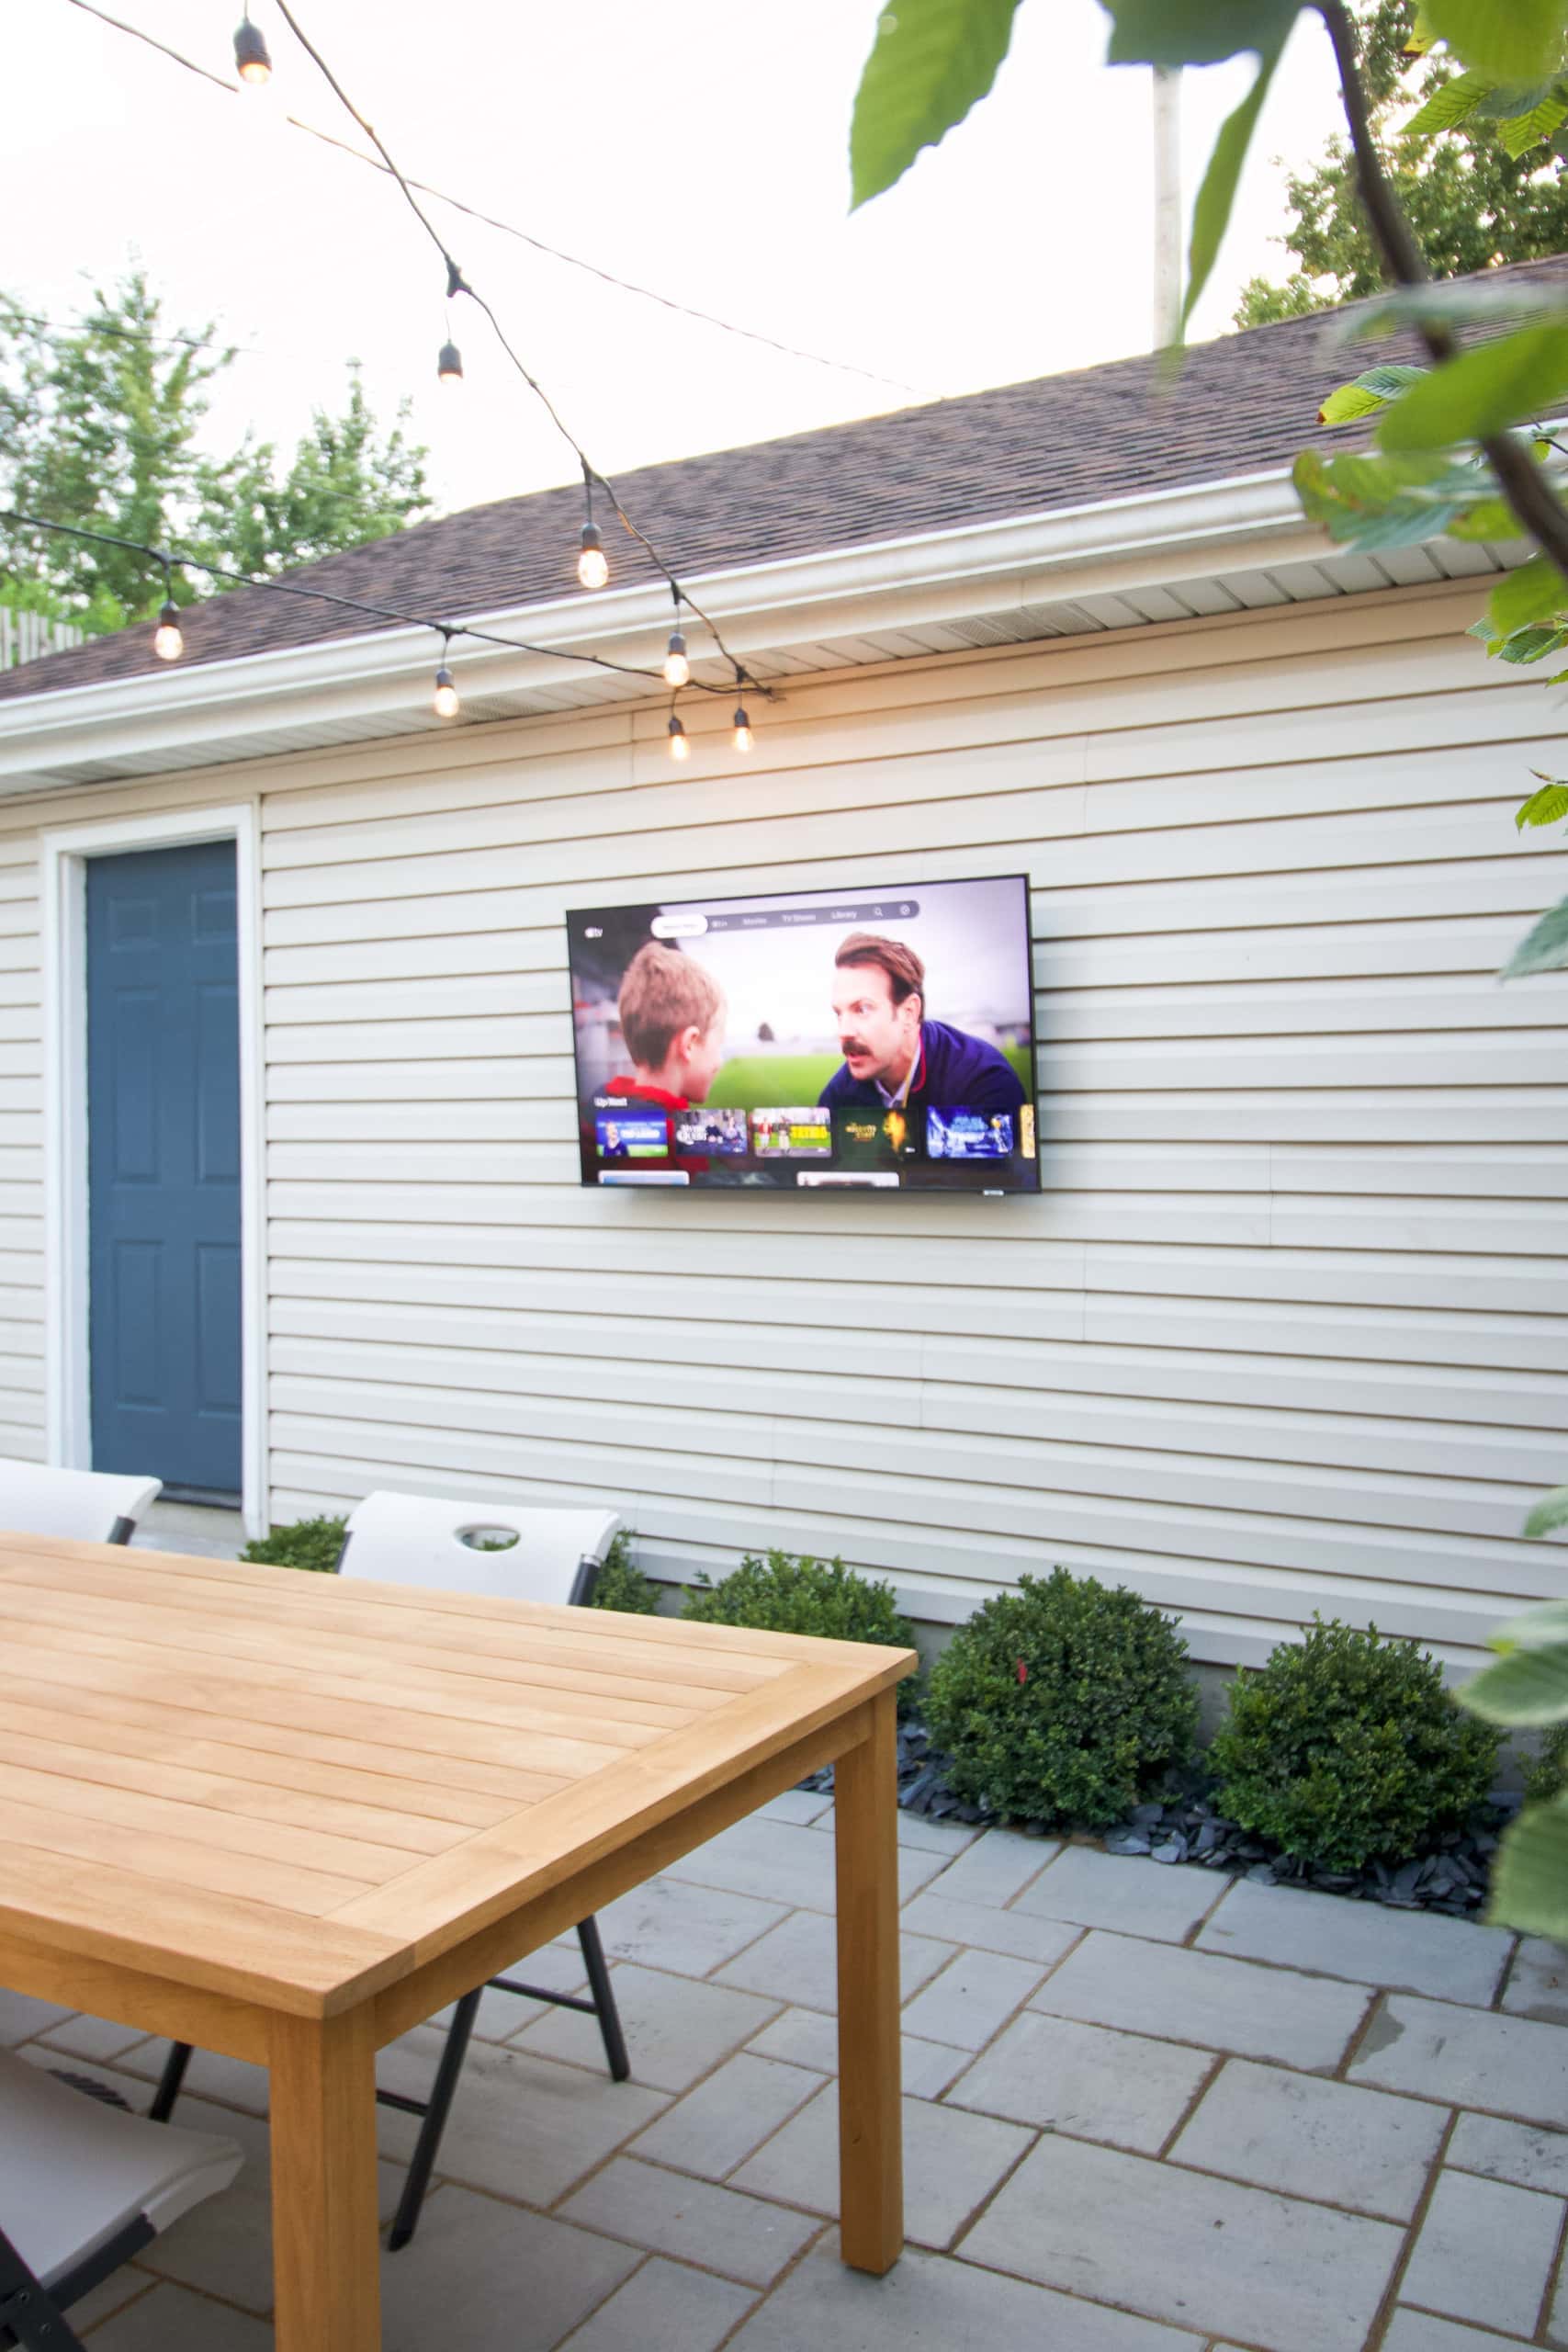 Our new outdoor TV